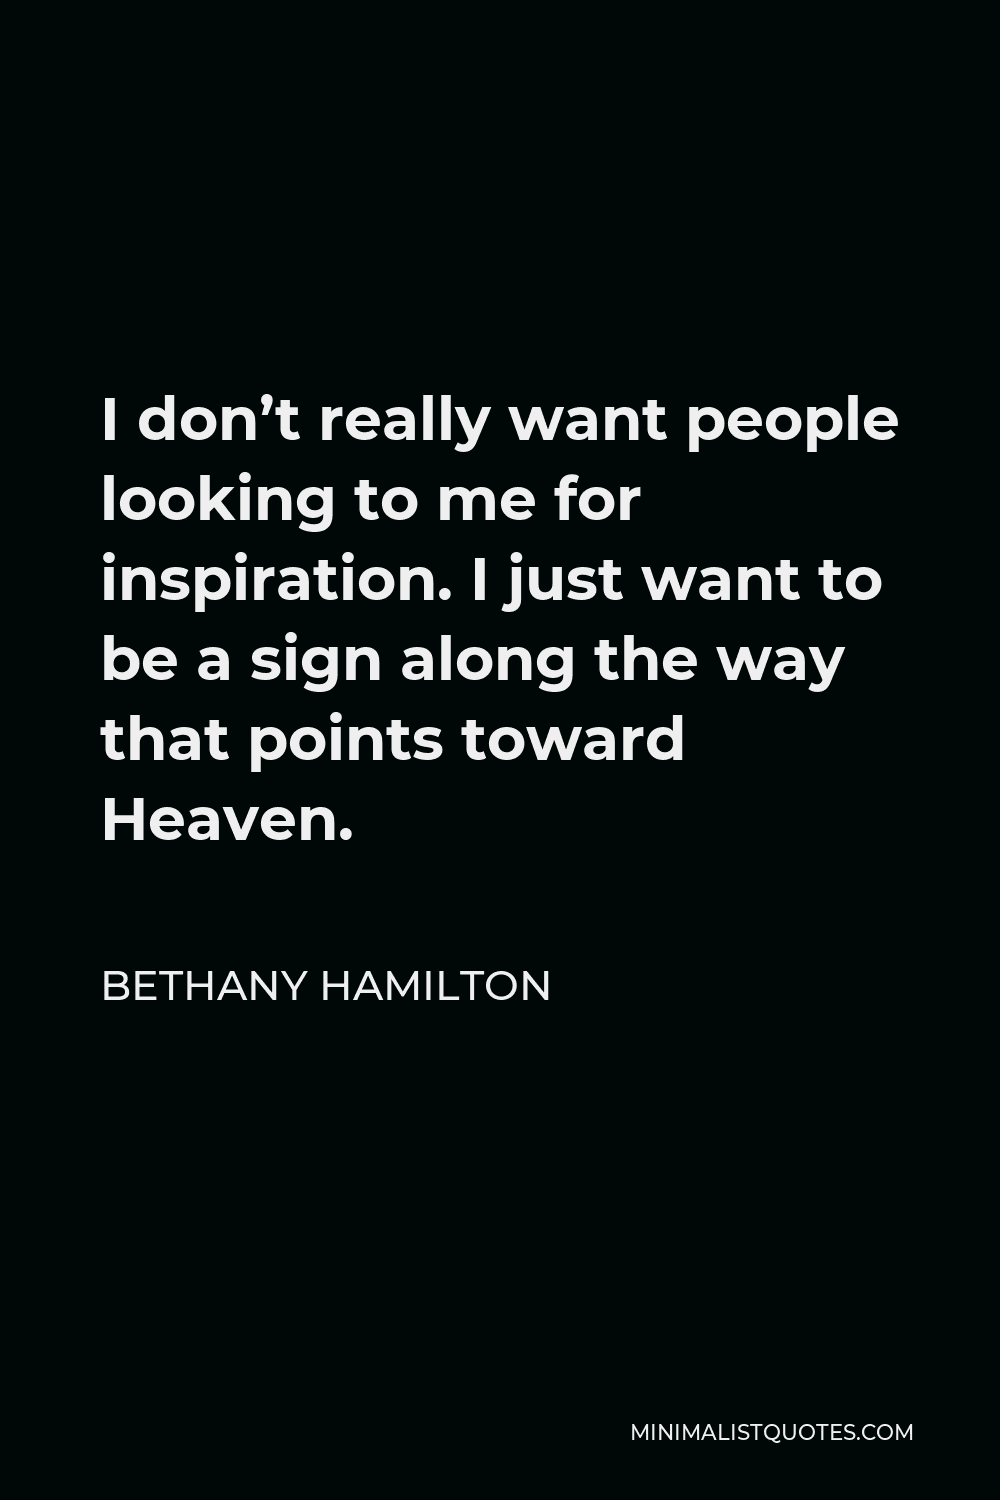 Bethany Hamilton Quote - I don’t really want people looking to me for inspiration. I just want to be a sign along the way that points toward Heaven.